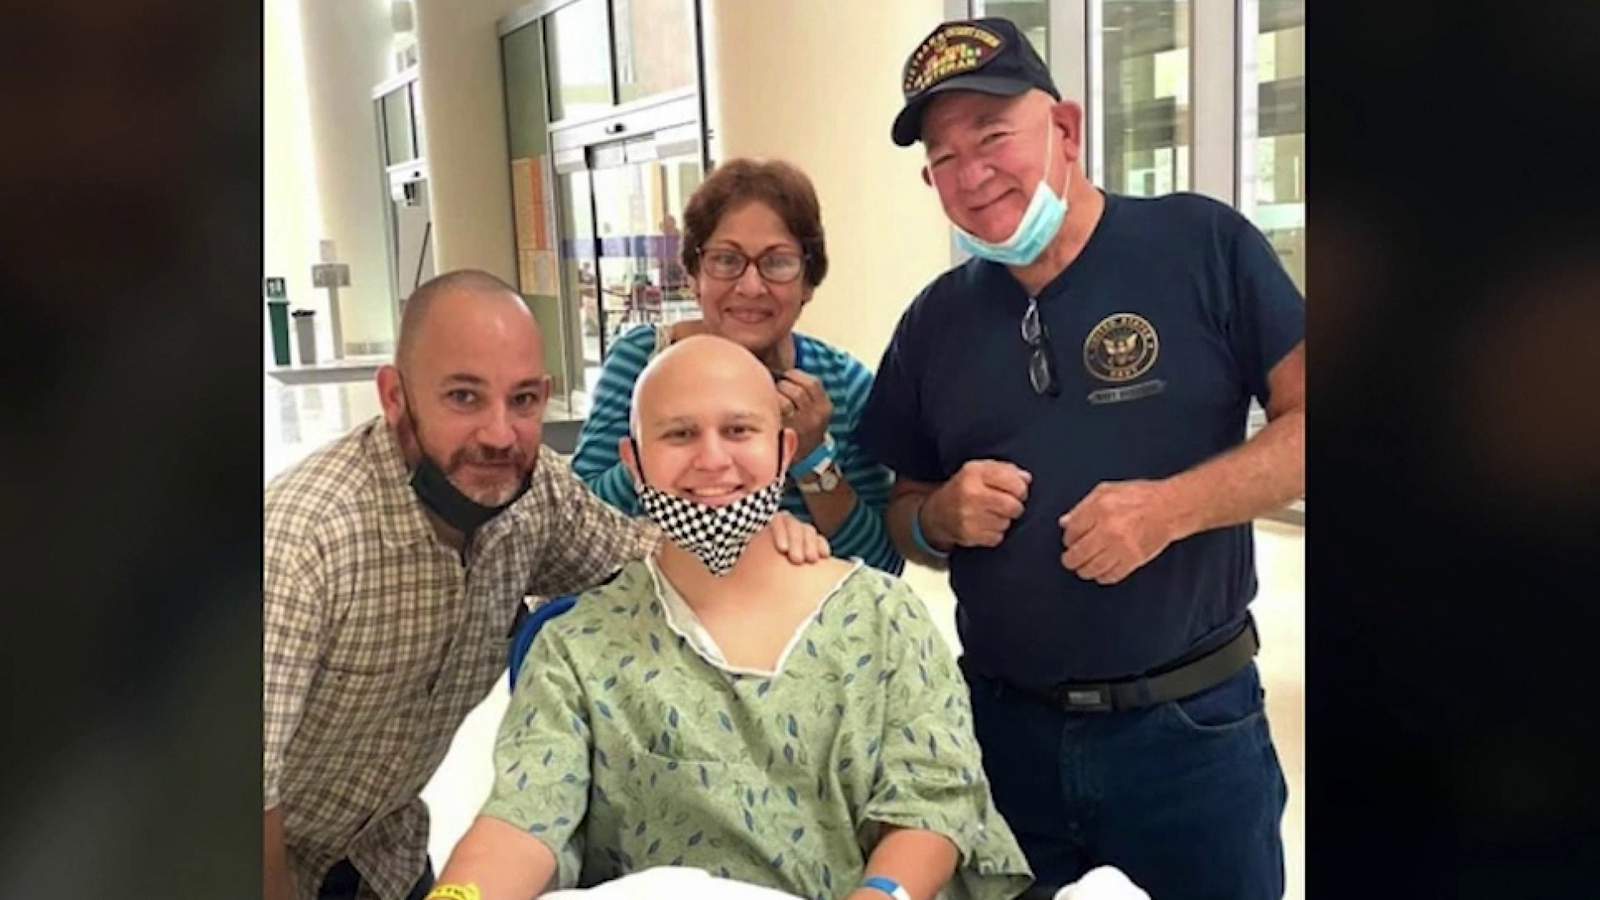 Central Catholic High student with rare bone cancer back home after undergoing surgery, re-learning how to walk